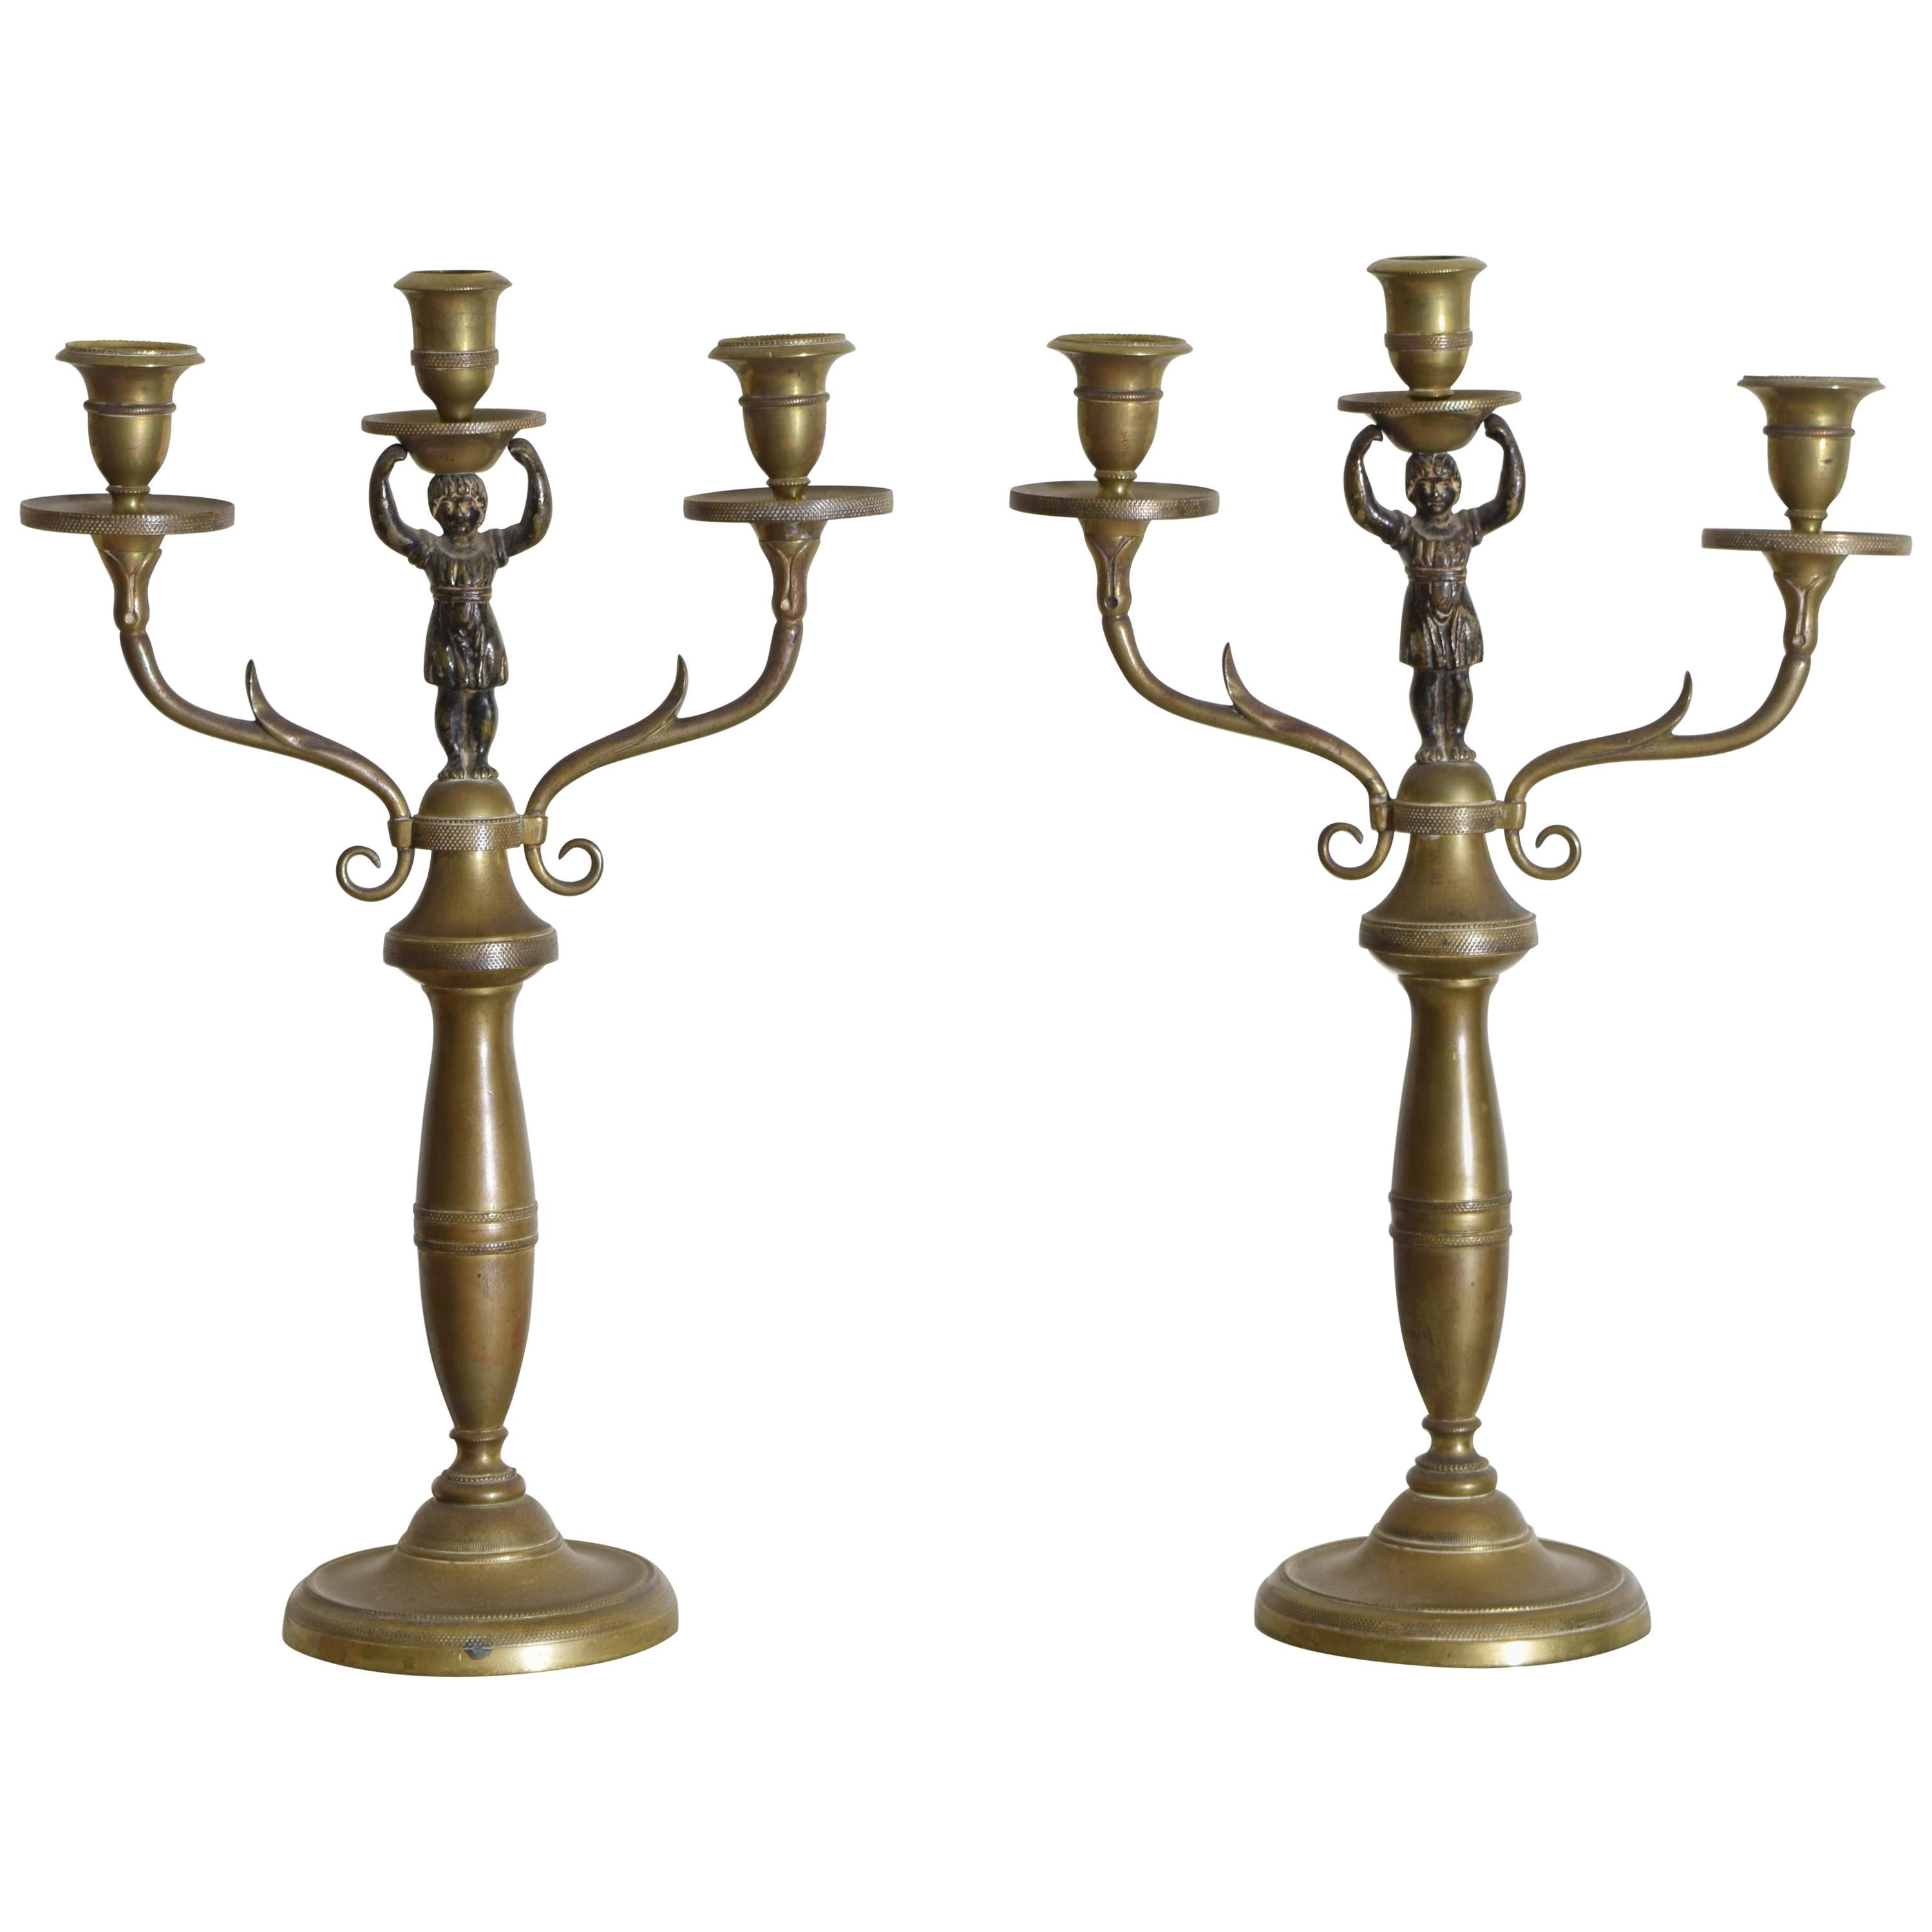 Pair Italian Empire Period Brass 3-Light Figural Candelabras, Early 19th Century For Sale